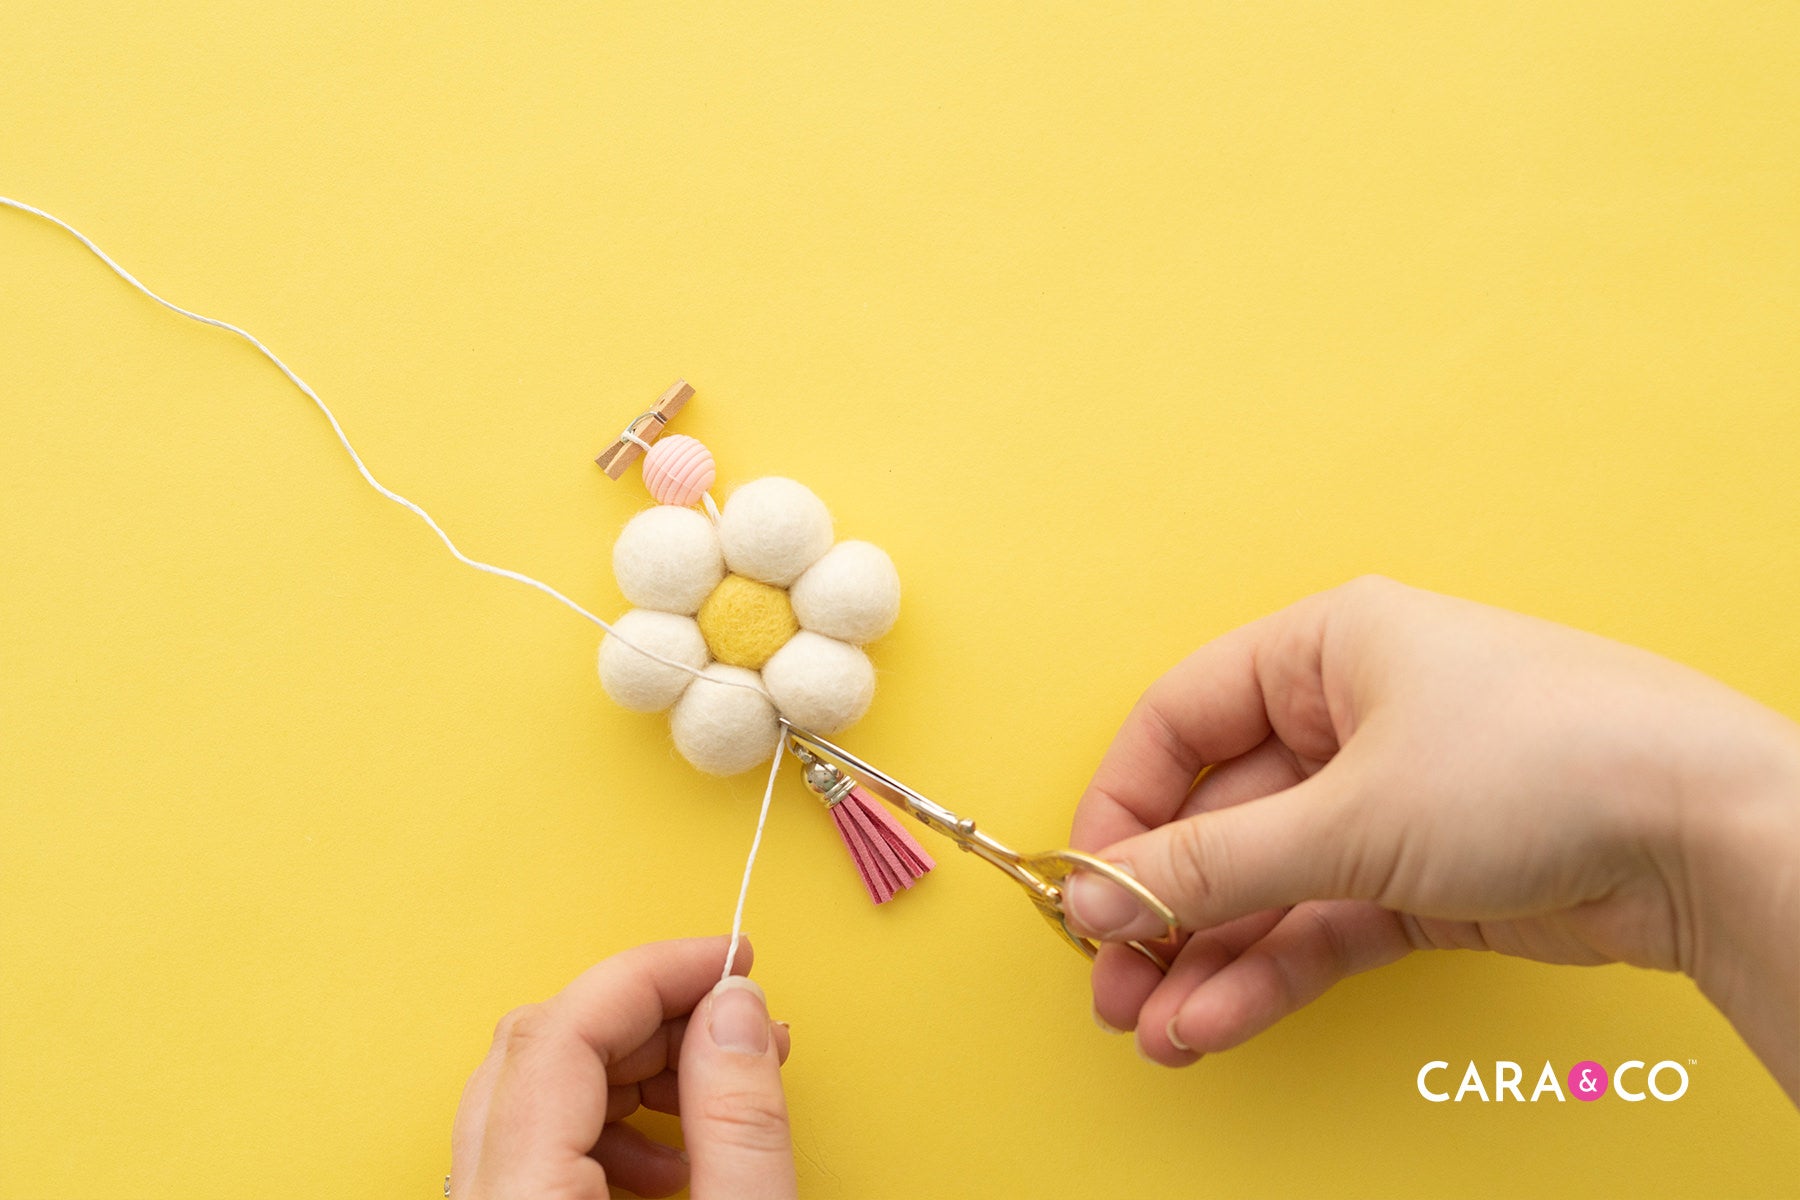 Trim the cord at your knot - Diffuser DIY Tutorial - Cara & Co